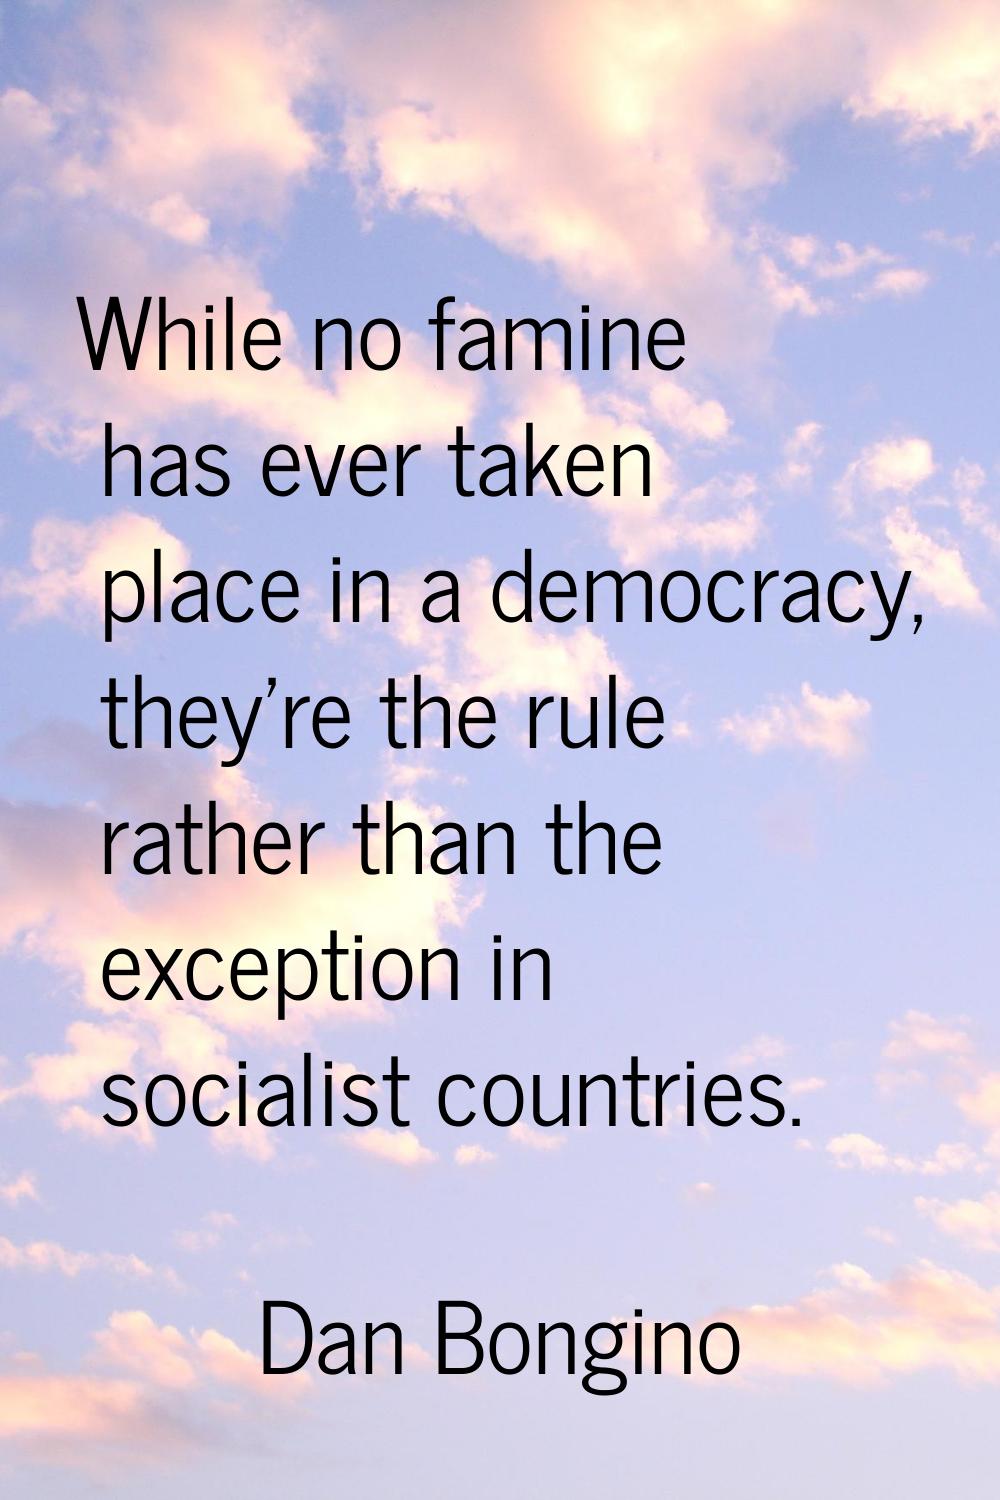 While no famine has ever taken place in a democracy, they're the rule rather than the exception in 